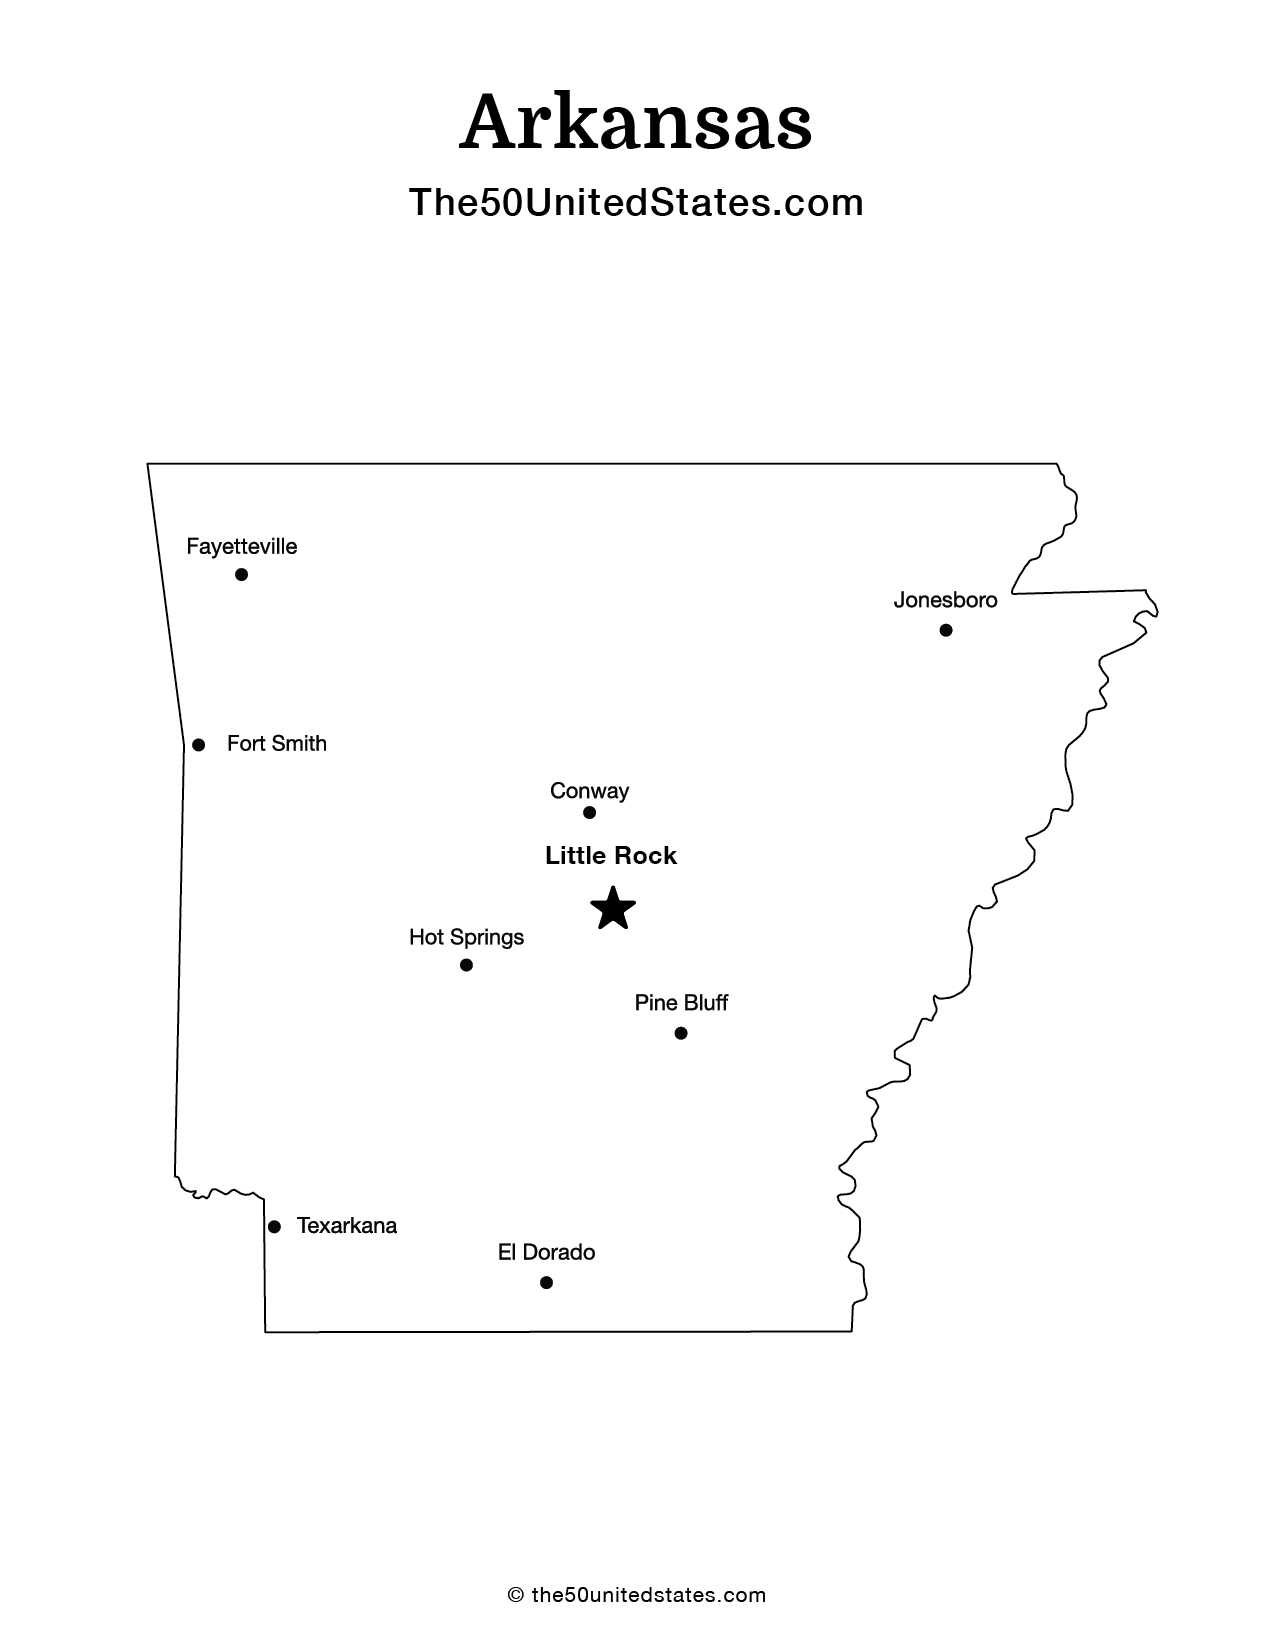 Arkansas with Cities (Labeled)